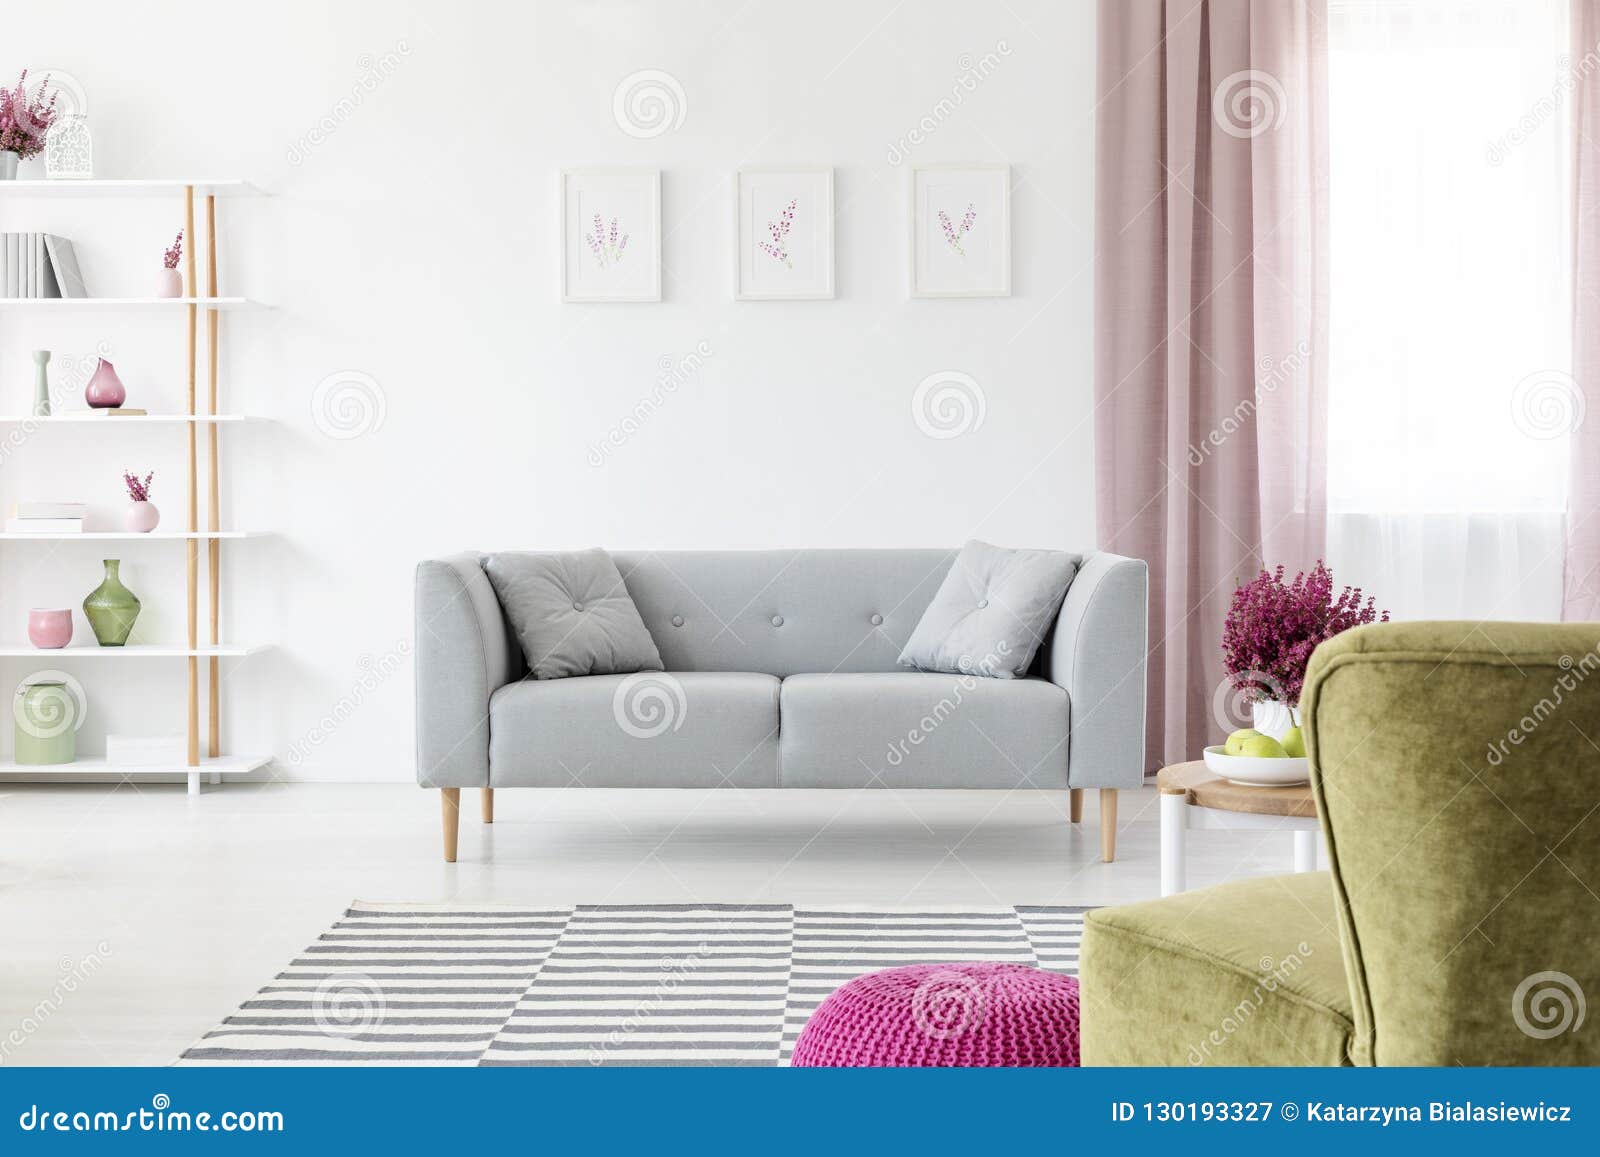 grey lounge with pillows placed in real photo of white living room interior with posters on wall, dirty pink drapes on window